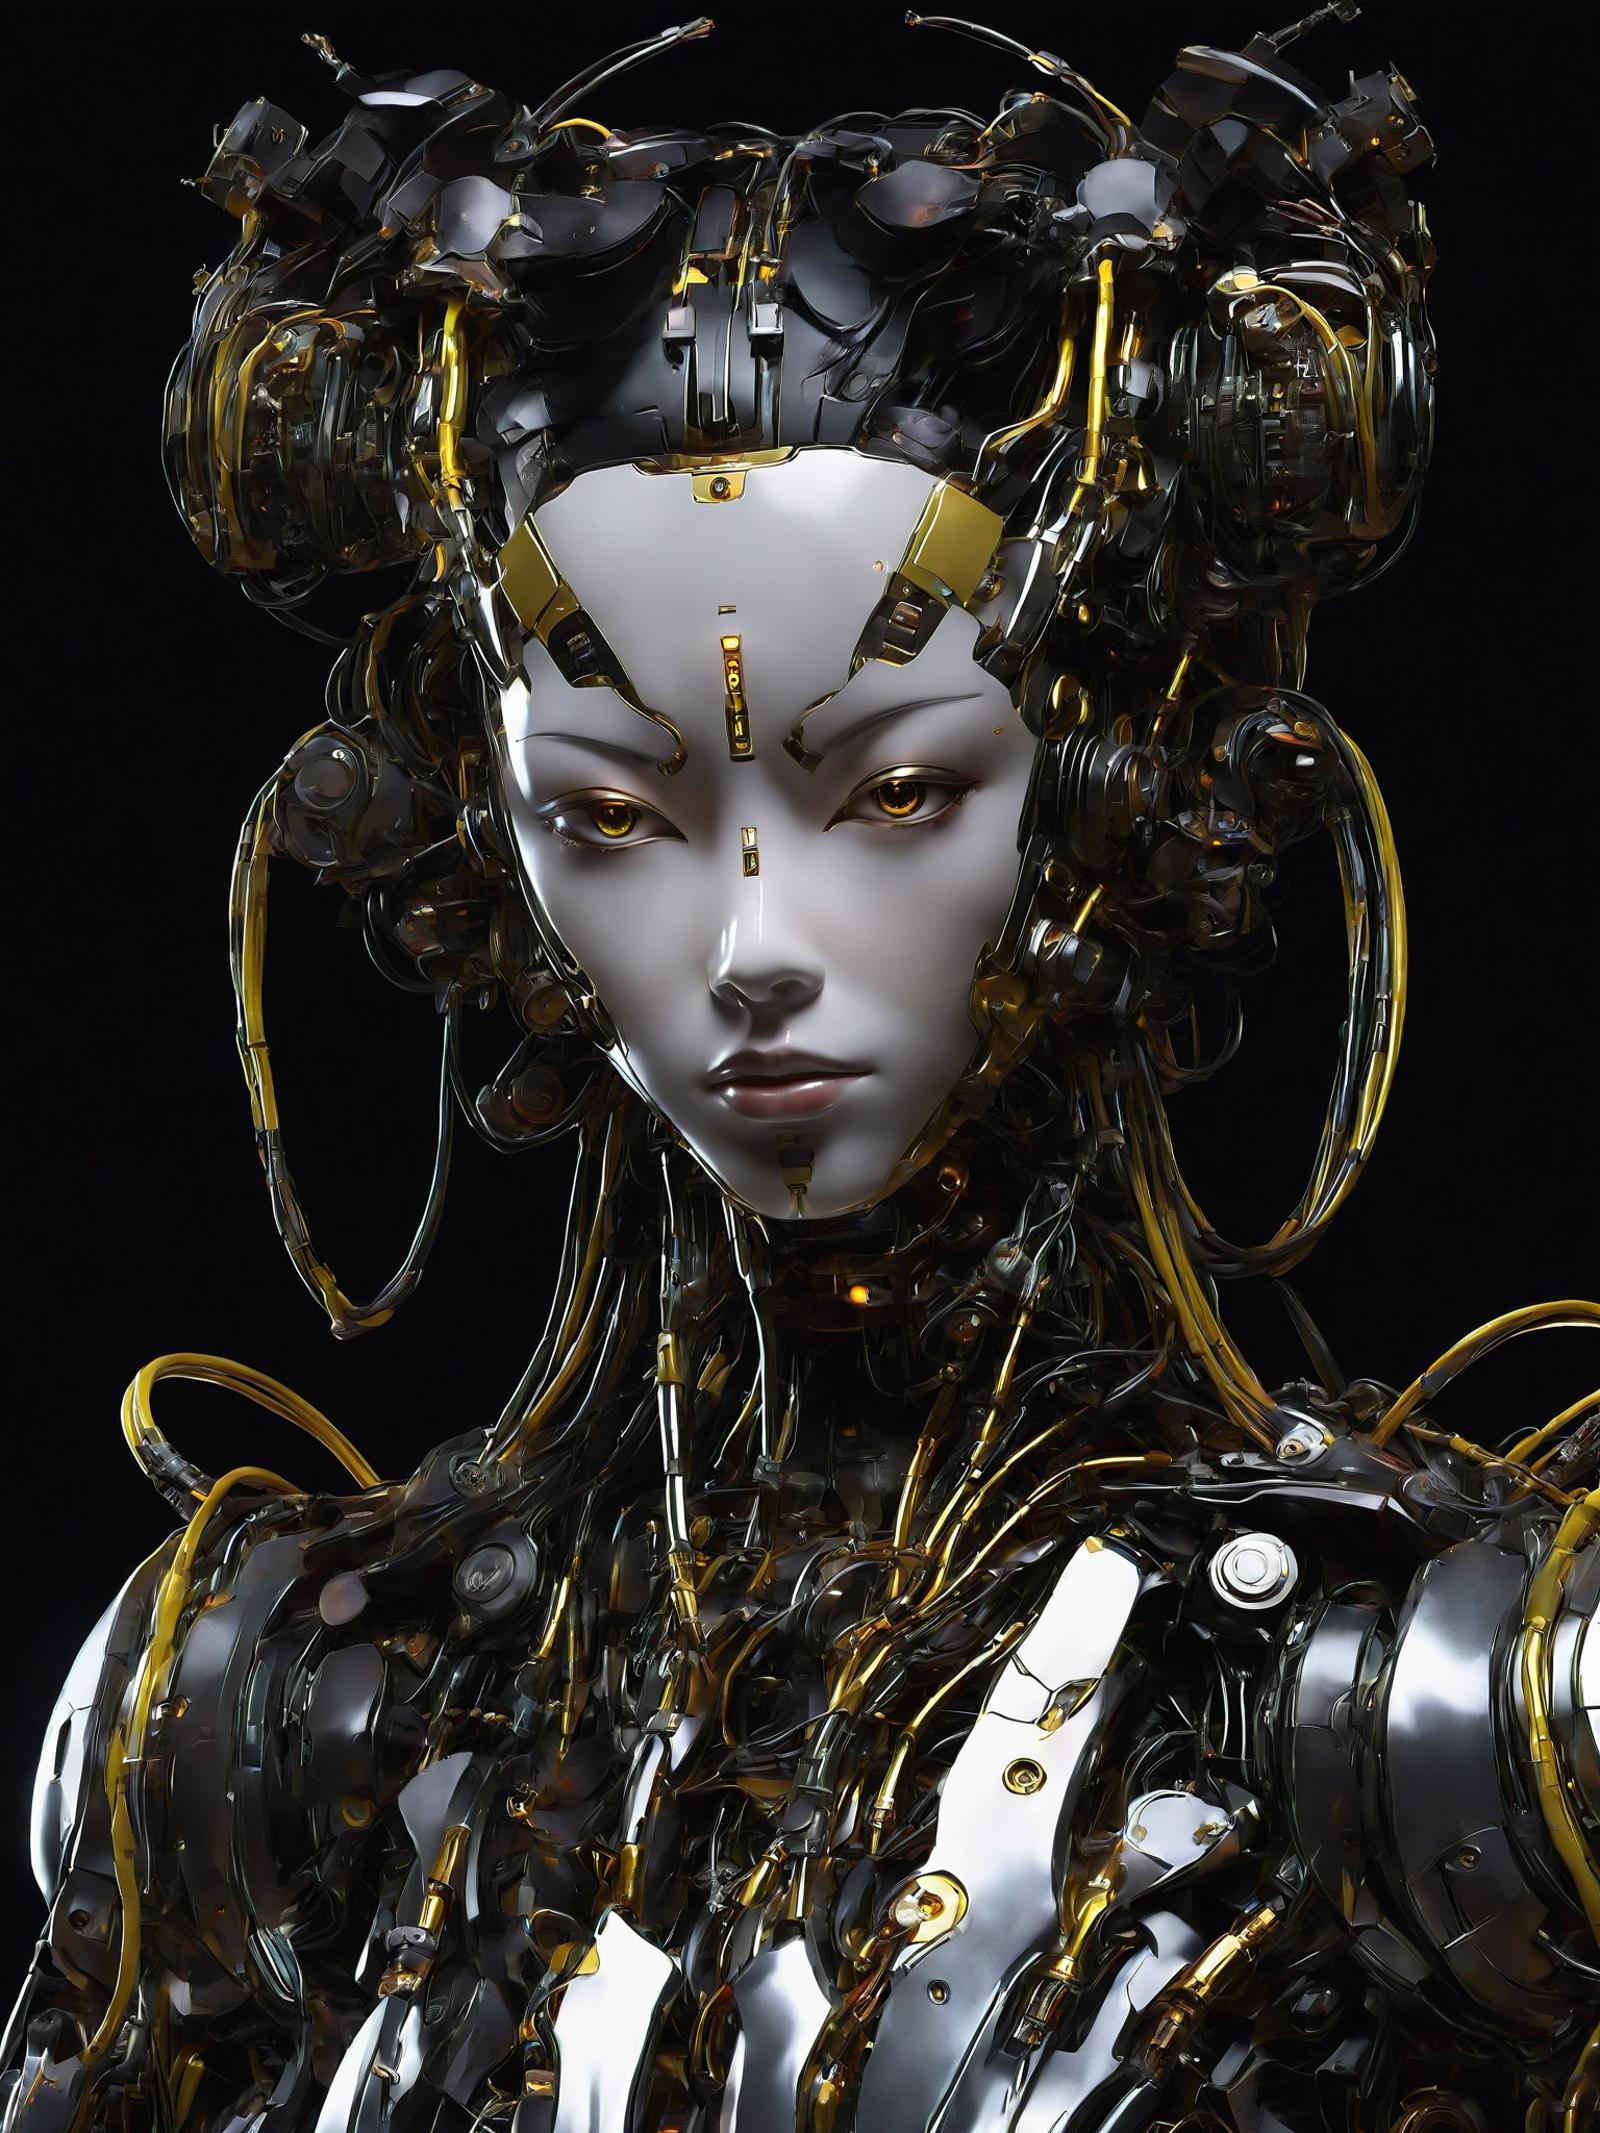 A futuristic robot sculpture with gold plated hair and glowing eyes.